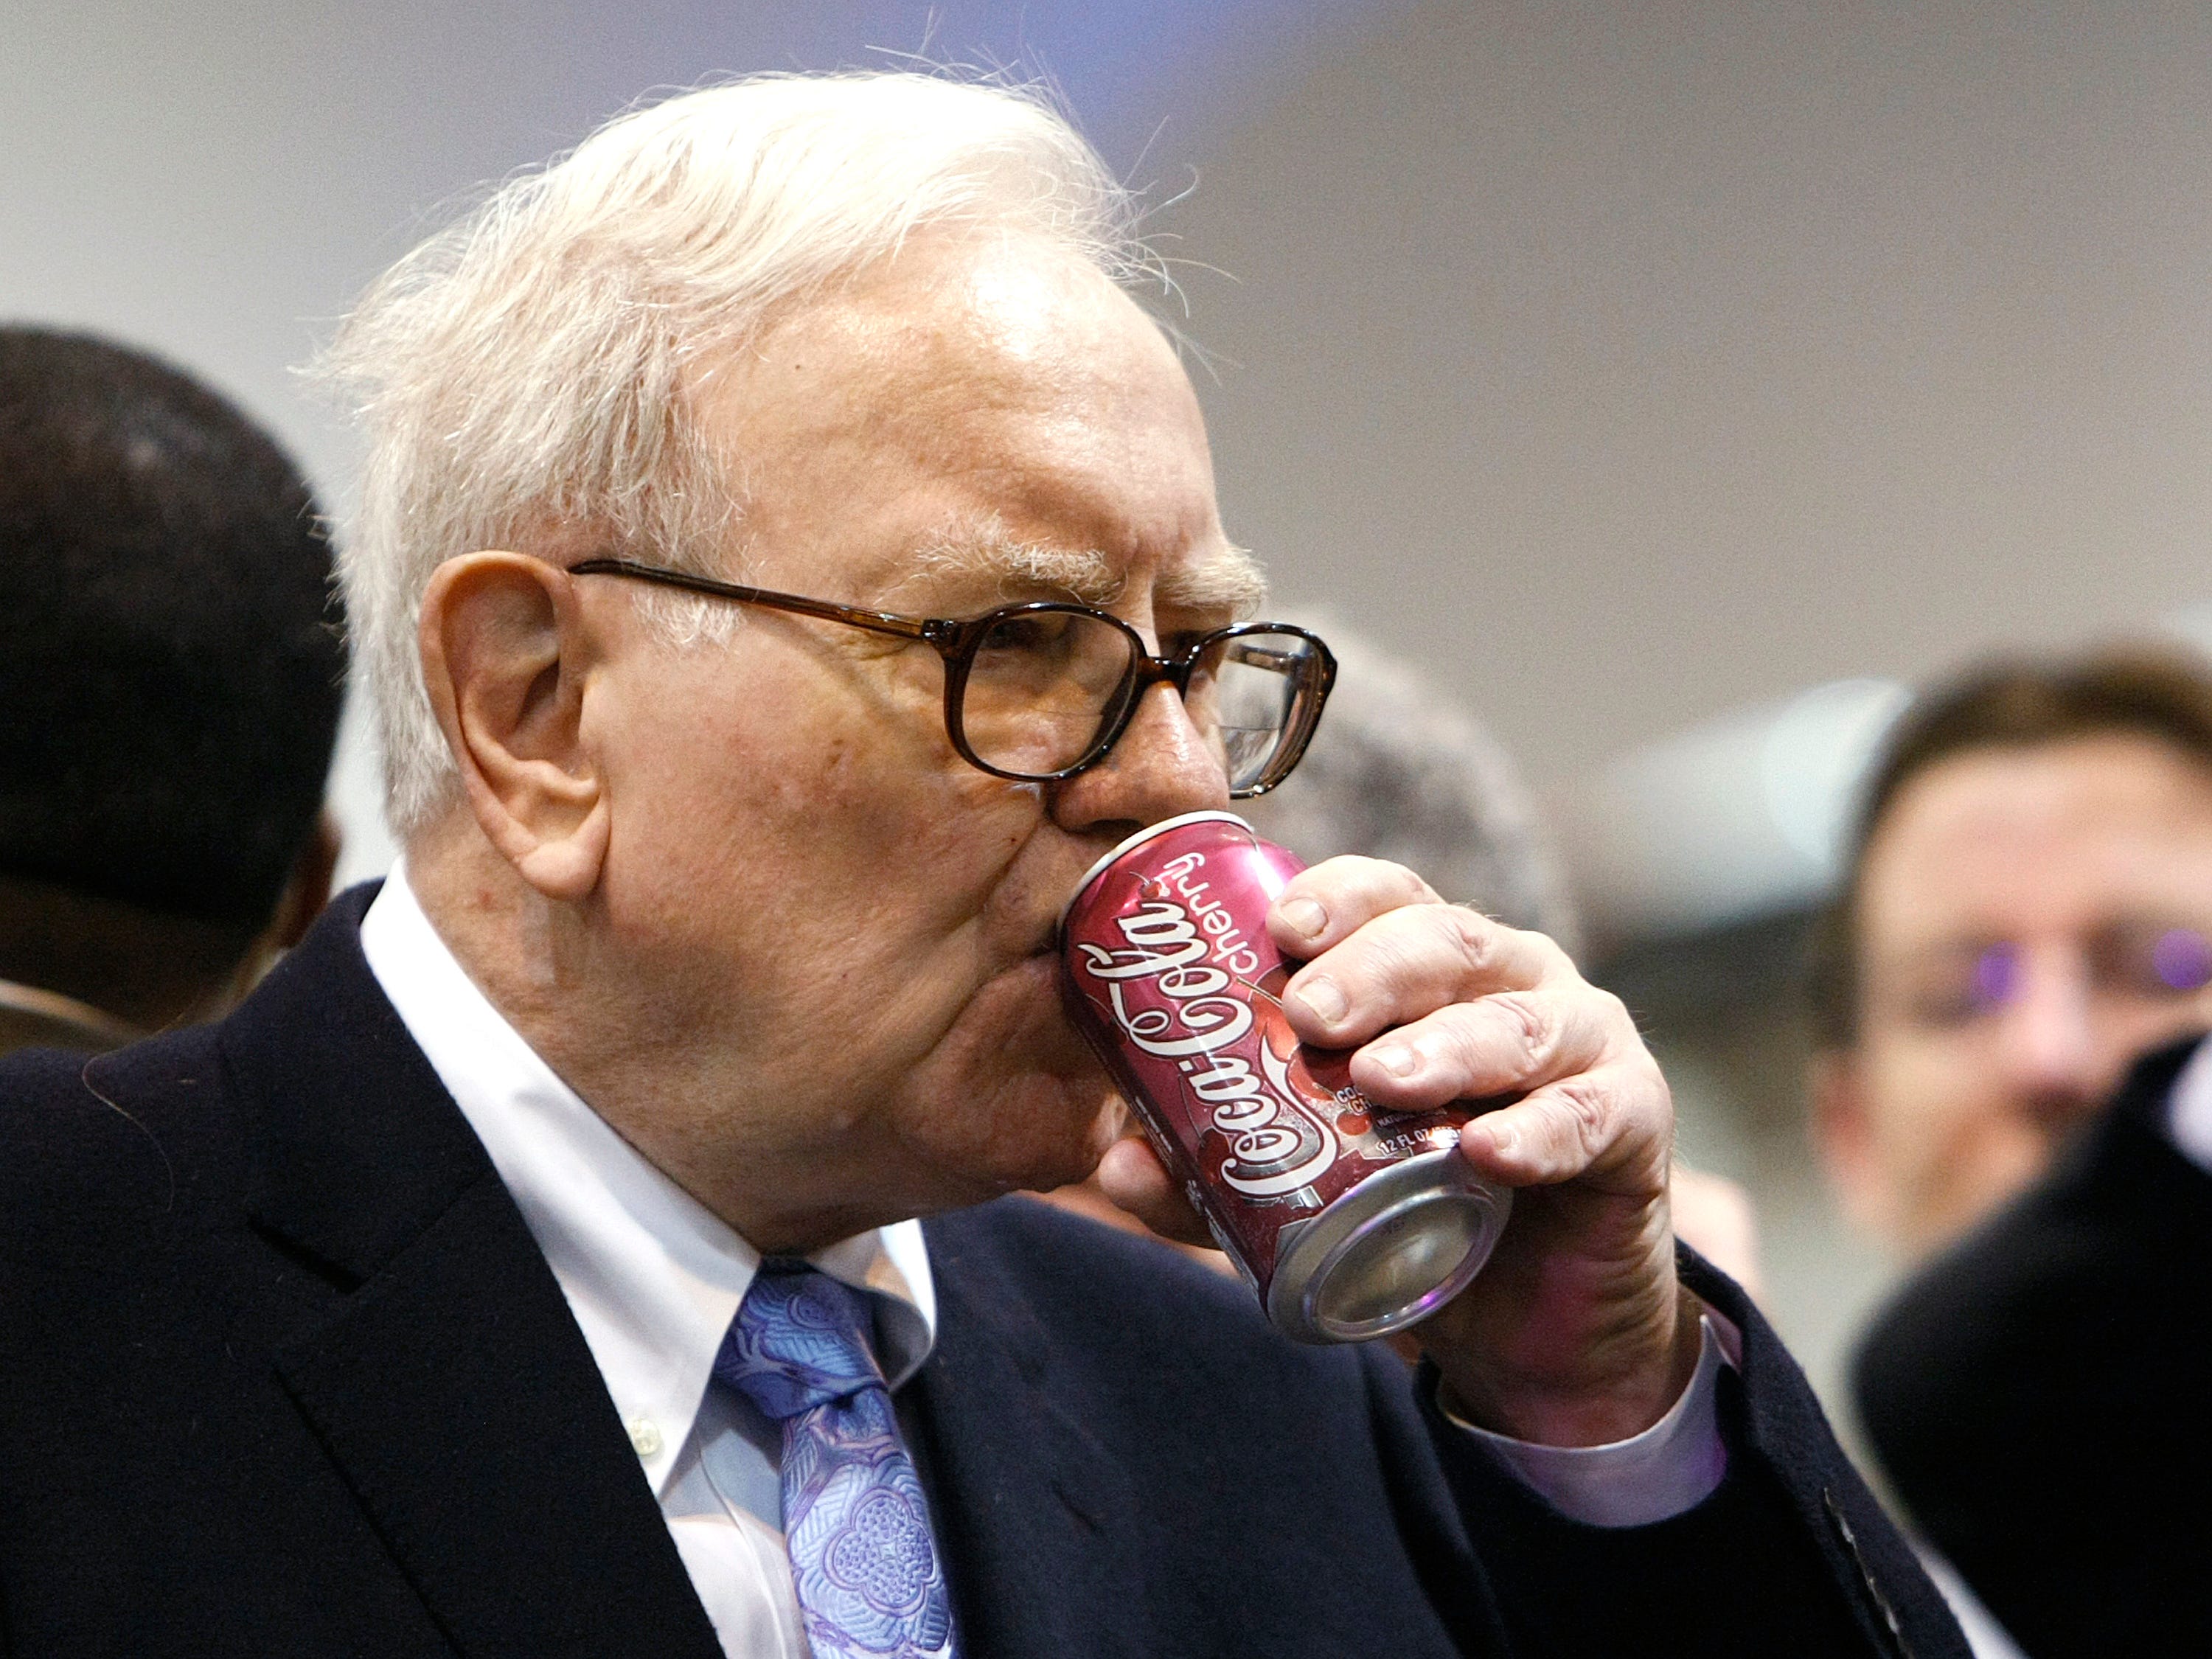 <p>Buffett once told <a href="https://fortune.com/2015/02/25/warren-buffett-diet-coke/" rel="noopener">Fortune</a> that he eats "like a six-year-old." He gets his <a href="https://www.businessinsider.com/warren-buffett-diet-2017-10">breakfast at McDonald's</a> almost every morning on the way to work. In 2017, he was spending no more than $3.17 on his order, paying with exact change, he said in the HBO documentary "<a href="https://www.hbo.com/movies/becoming-warren-buffett" rel="noopener">Becoming Warren Buffet</a>." He also drinks an alarming amount of Coca-Cola — he's said he drinks at least 5 servings every day.</p>